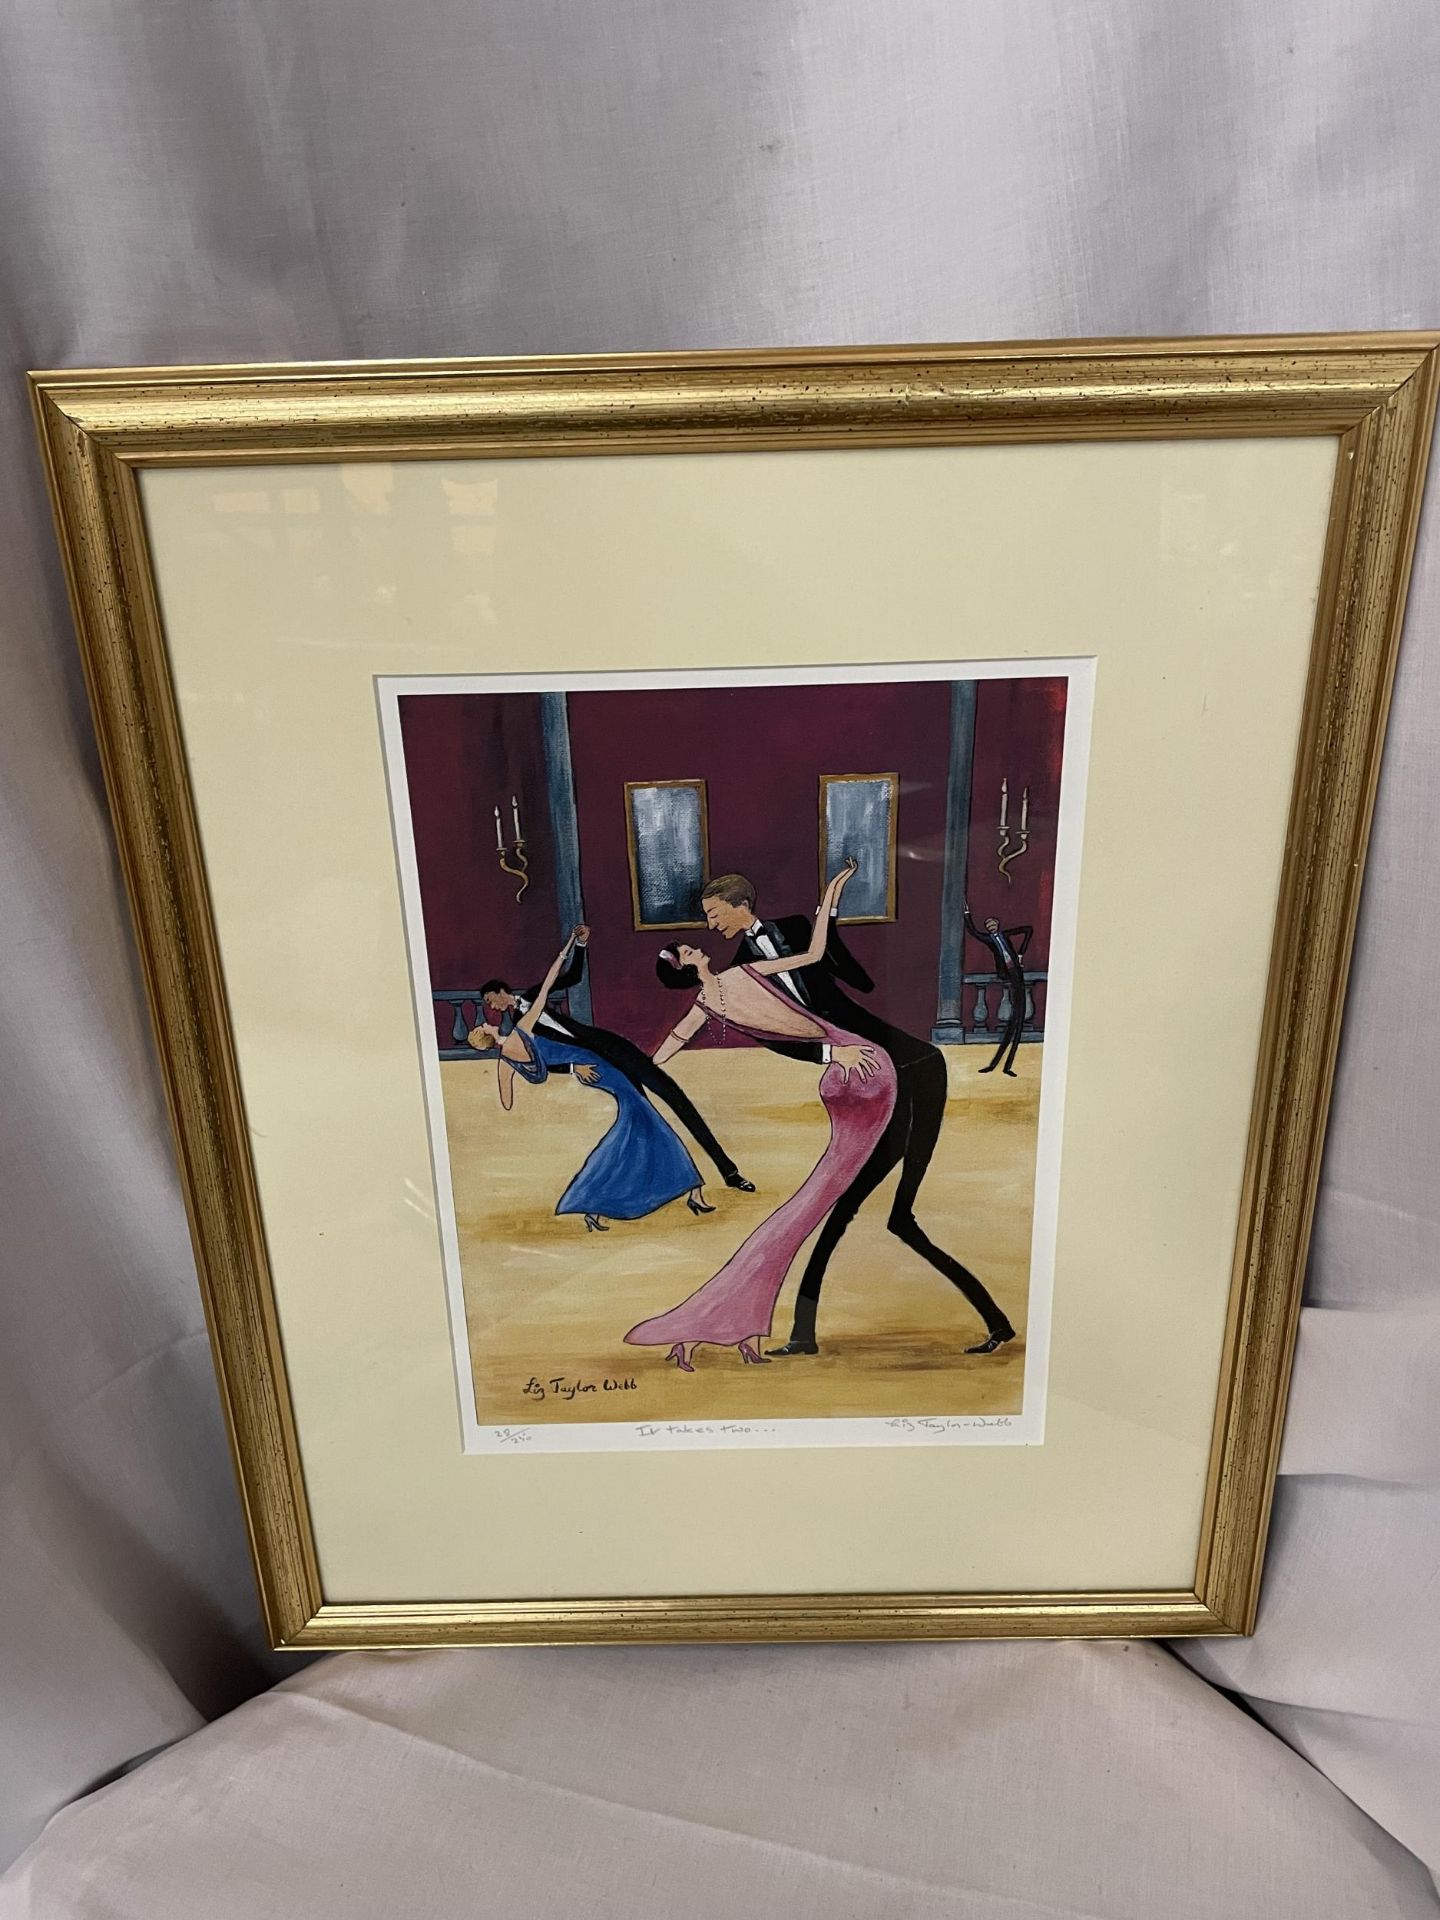 A GILT FRAMED LIMITED EDITION LIZ TAYLOR WEBB PICTURE 'IT TAKES TWO' PENCIL SIGNED TO LOWER RIGHT